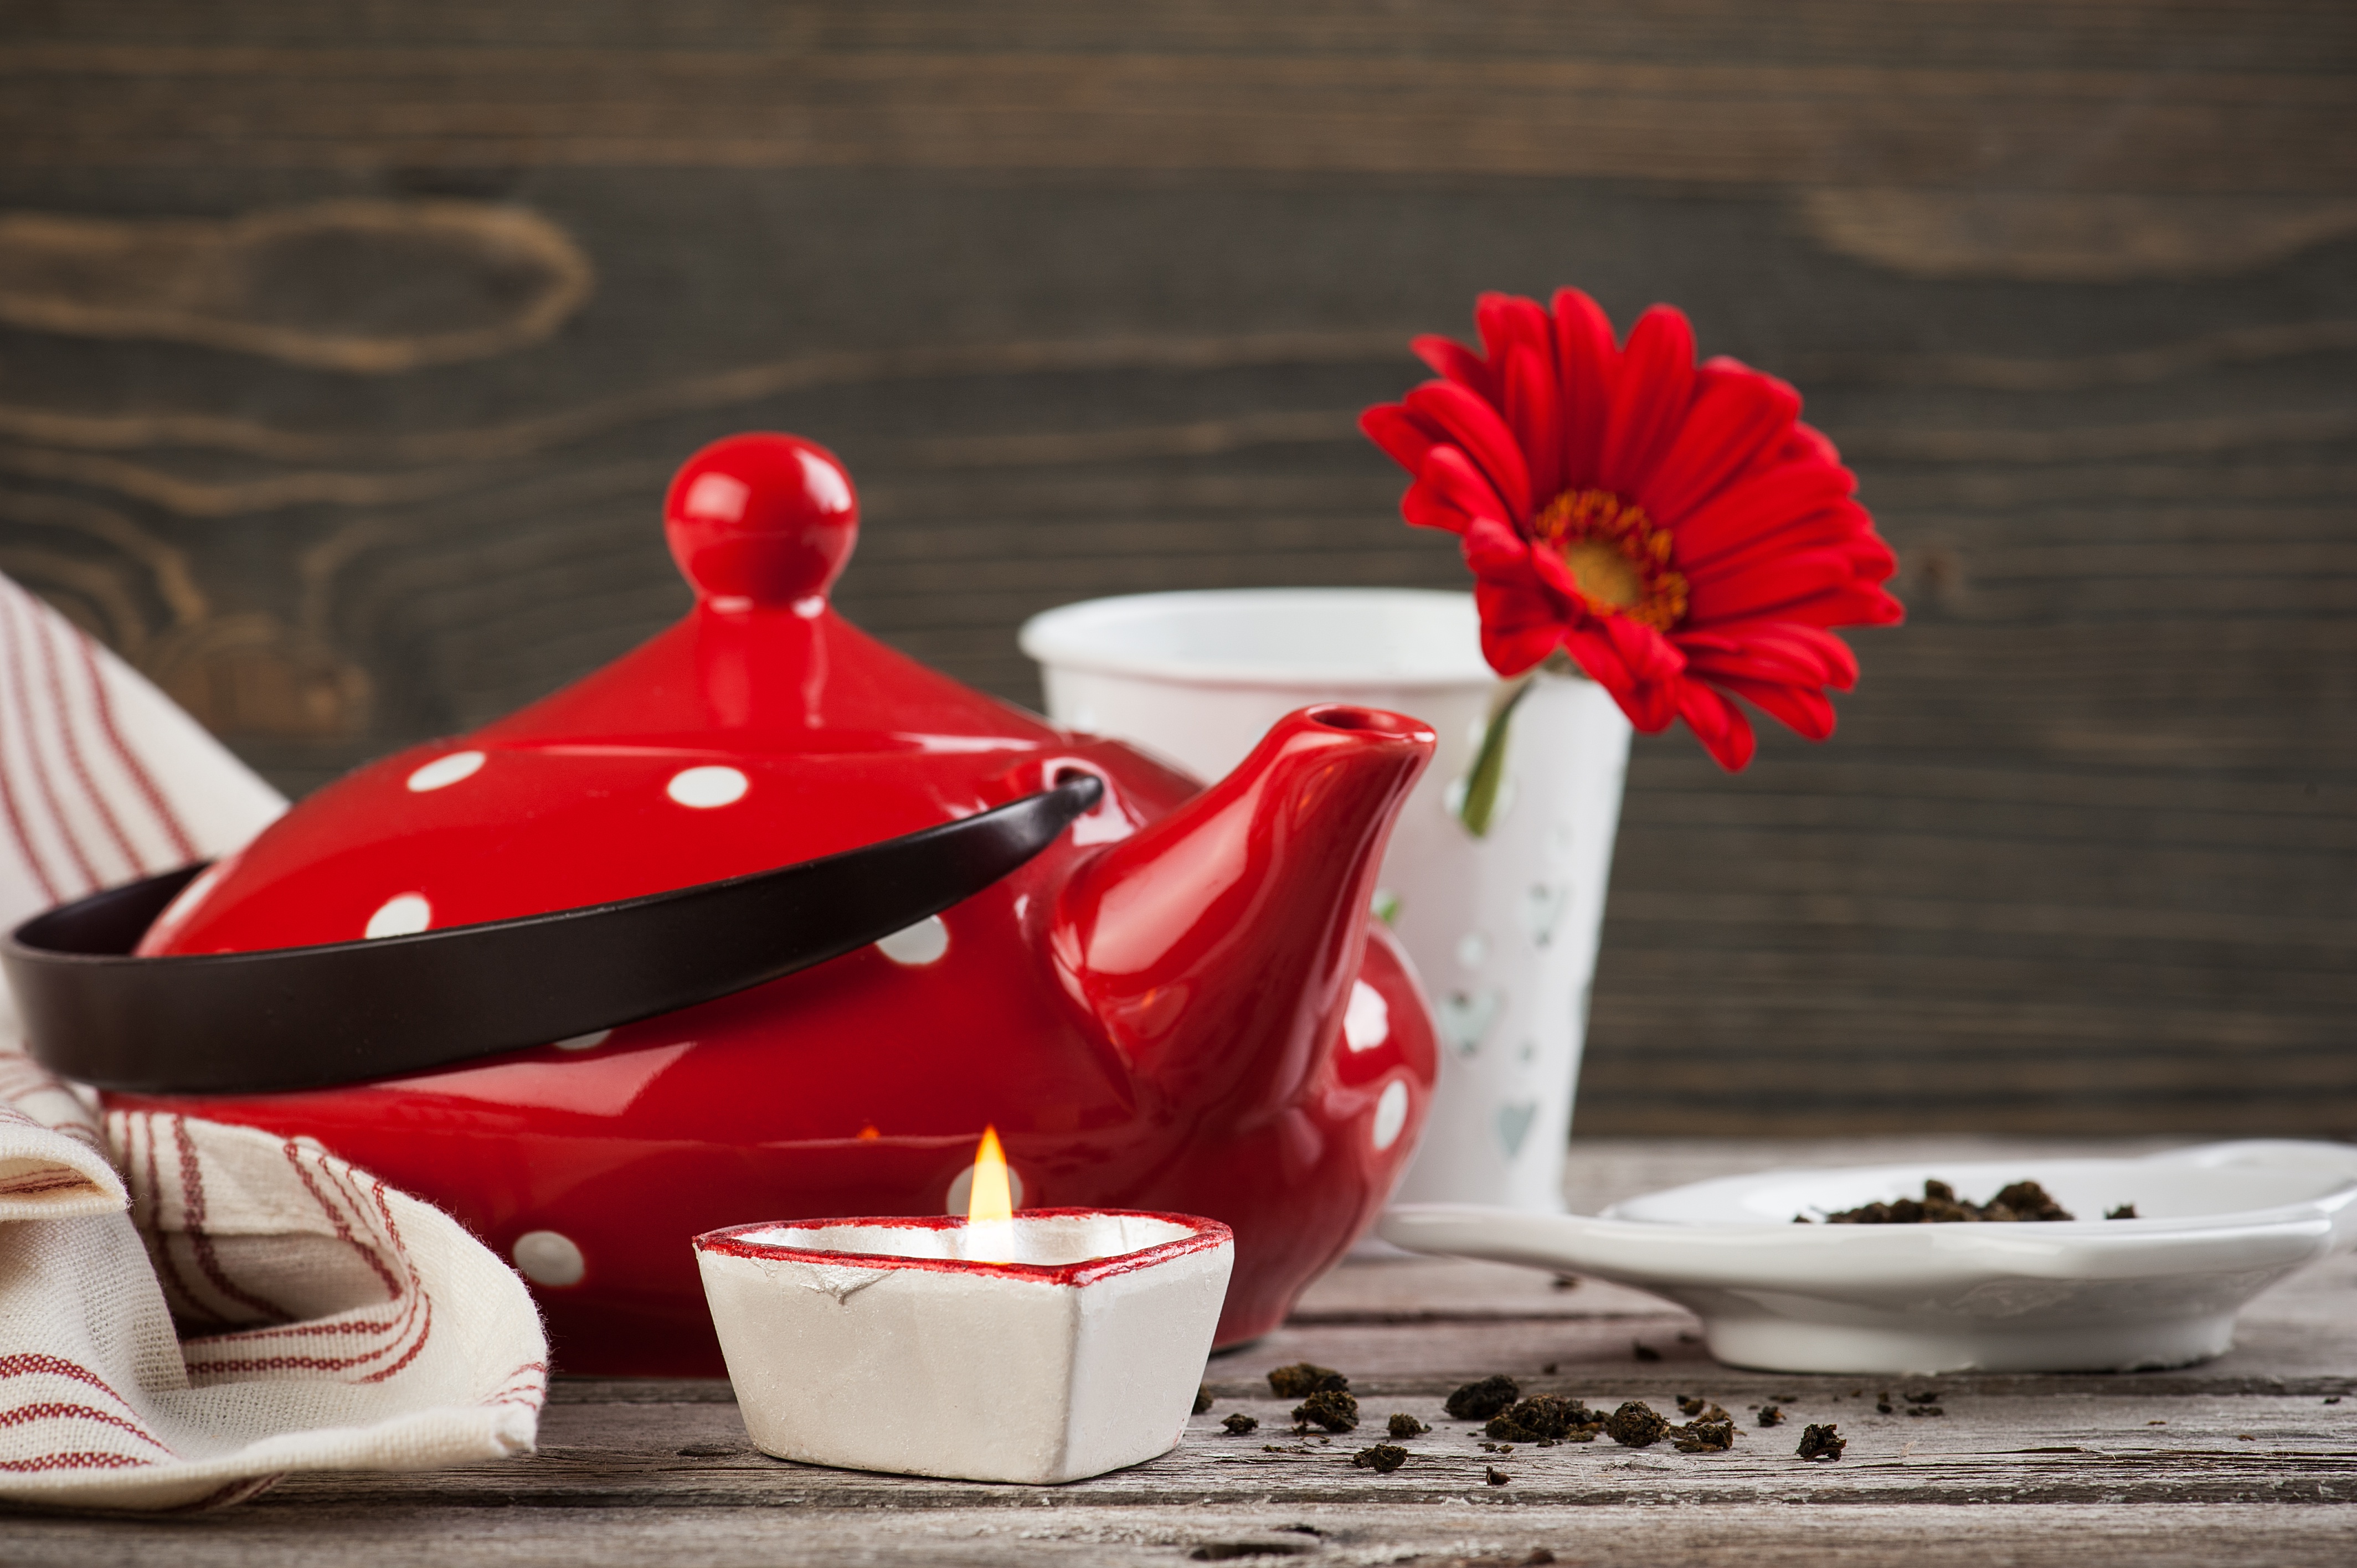 photography, still life, candle, kettle, teapot